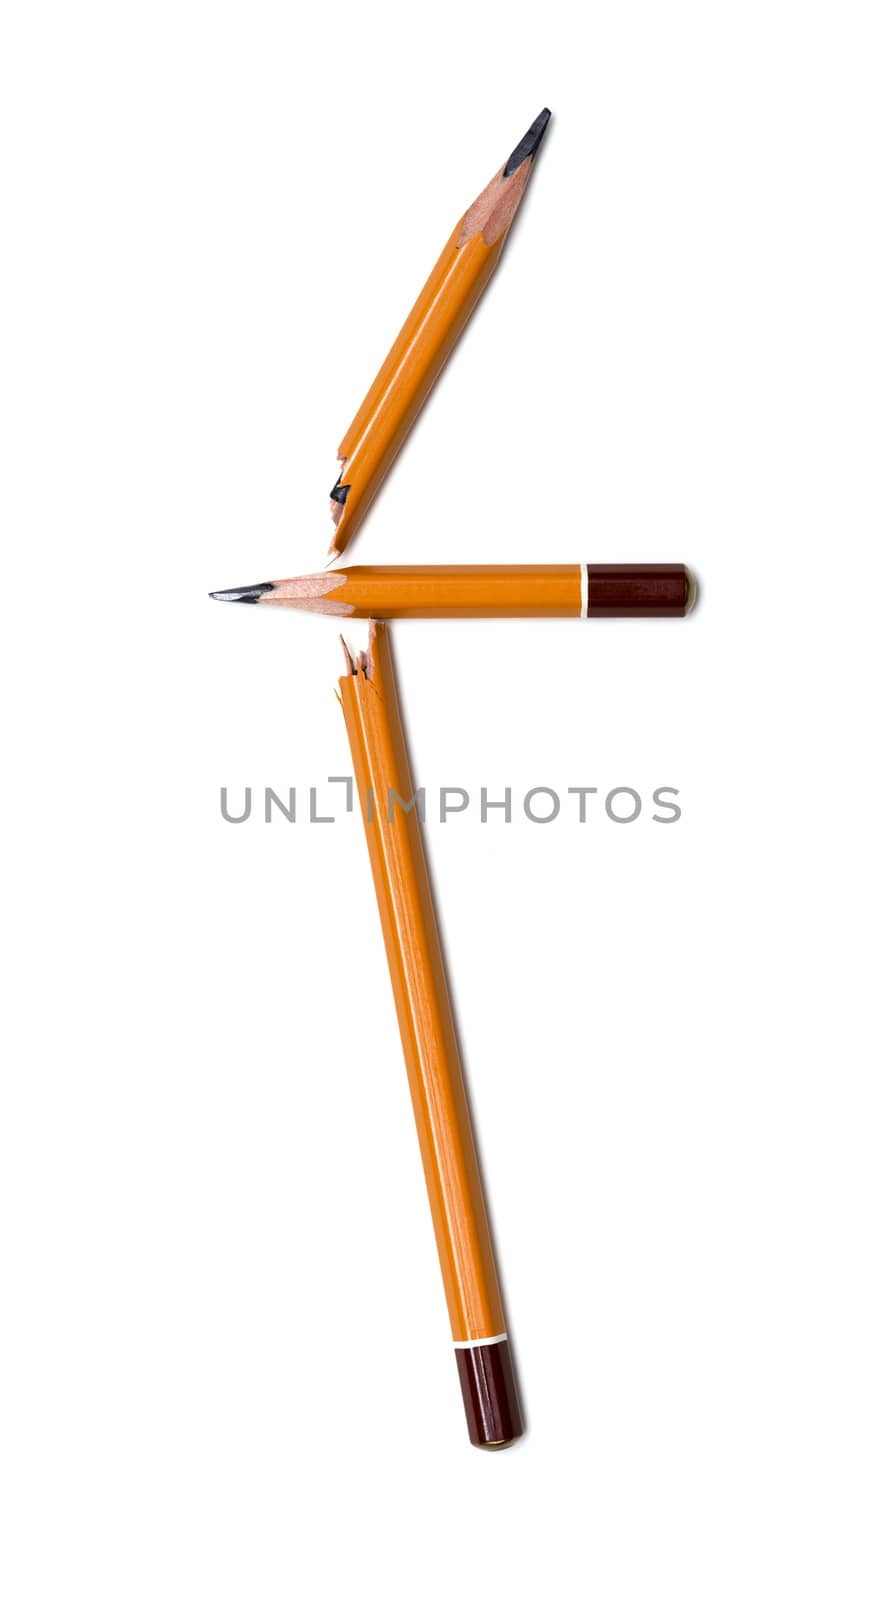 broken pencil on a white background